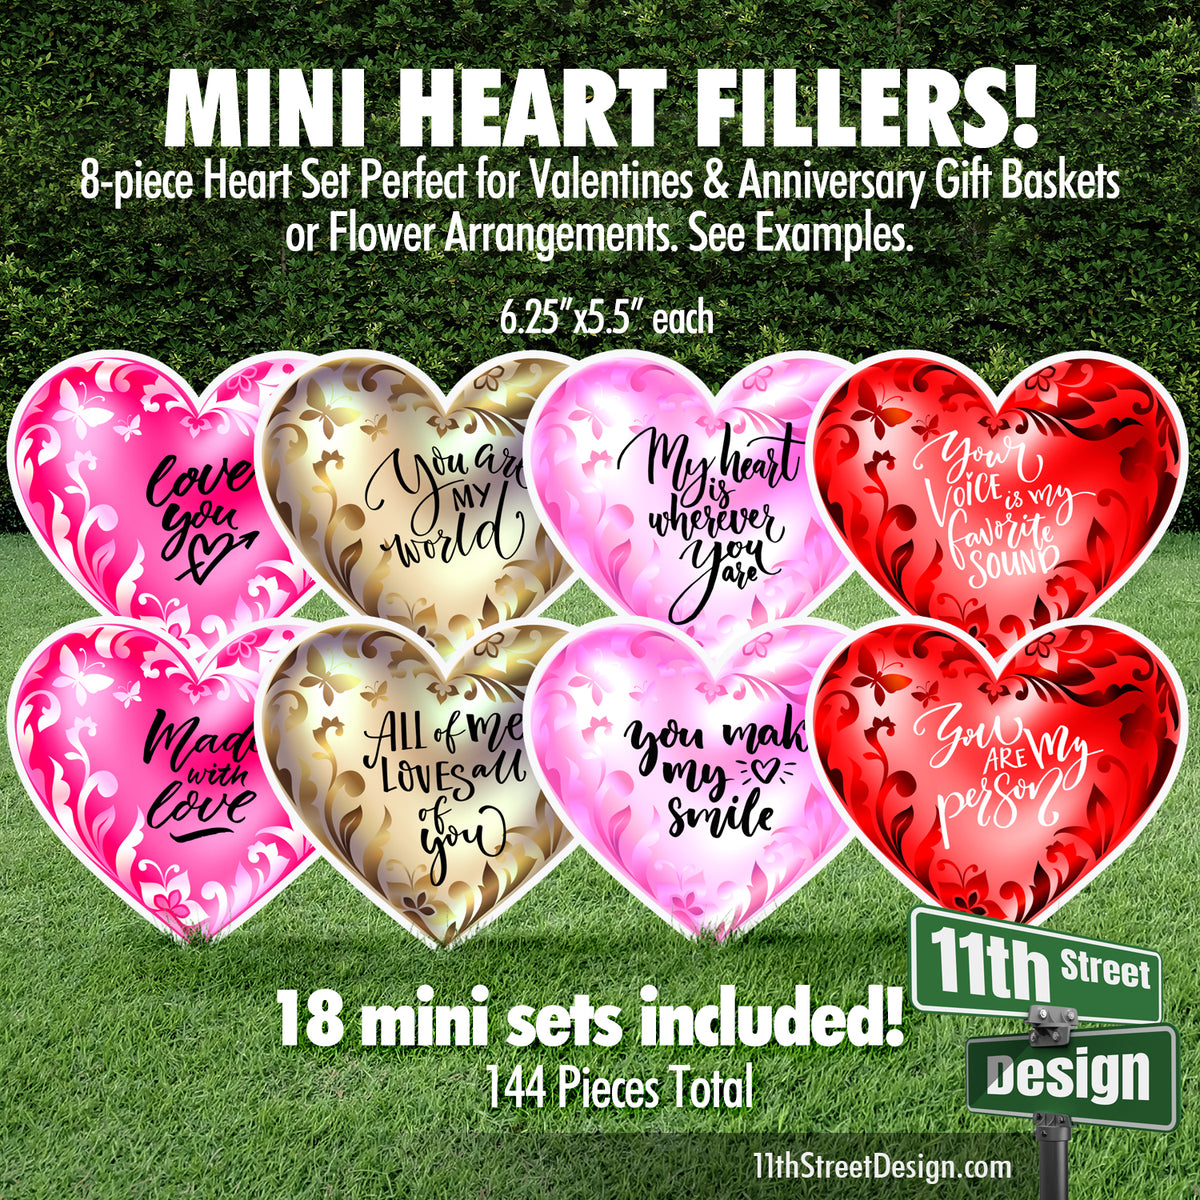 Mini Heart Filler Decorations Perfect for Anniversary and Valentines Baskets or Floral Arrangements